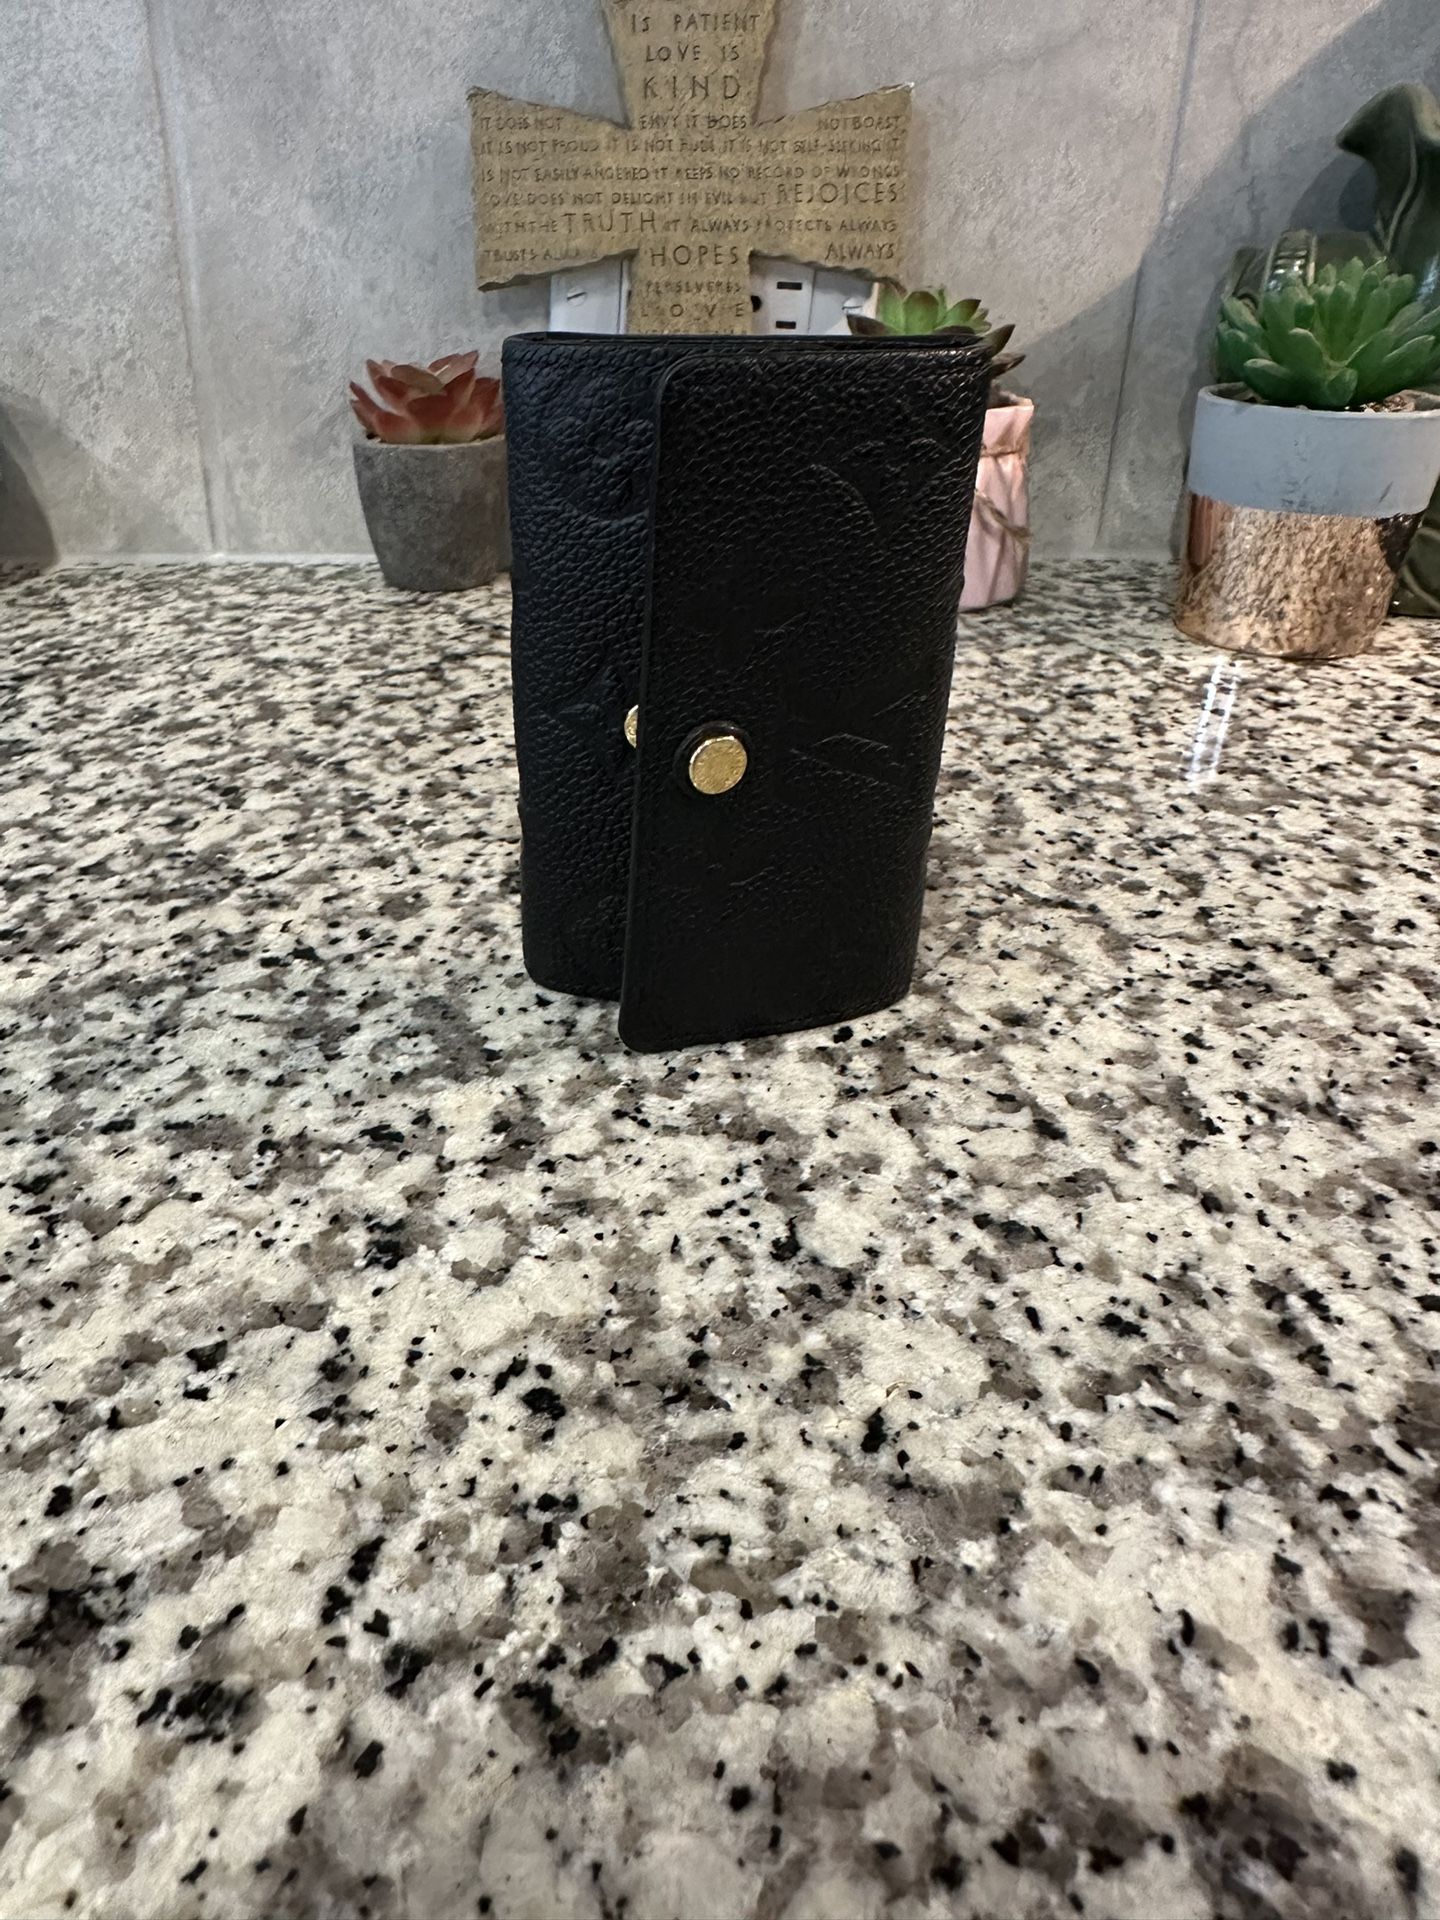 Louis Vuitton 6 Key Ring Holder for Sale in Leander, TX - OfferUp